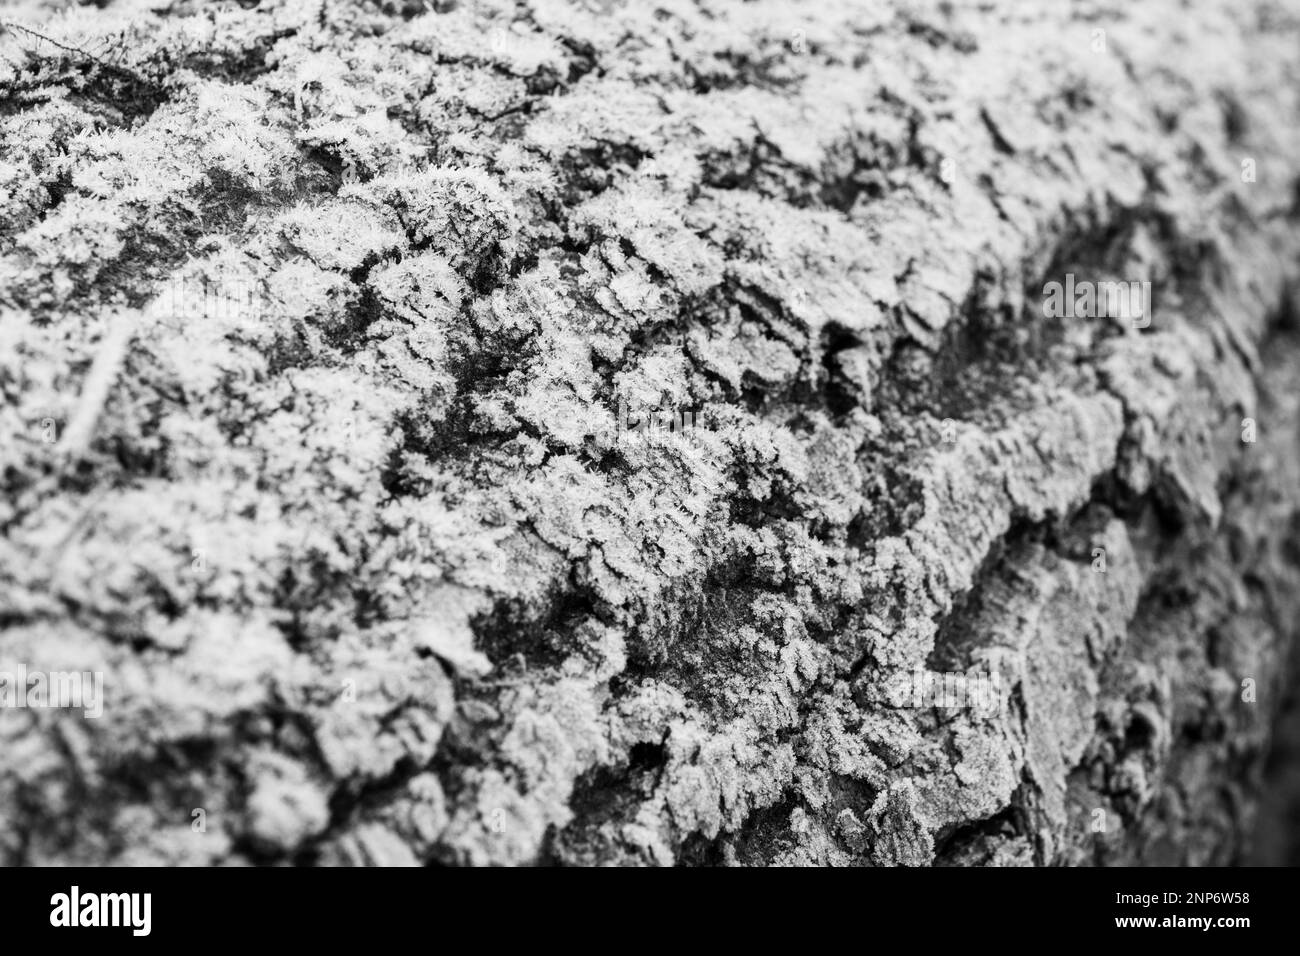 Hoarfrost Crystals on a Rough Tree Bark Abstract Texture in Monochrome Black and White Stock Photo